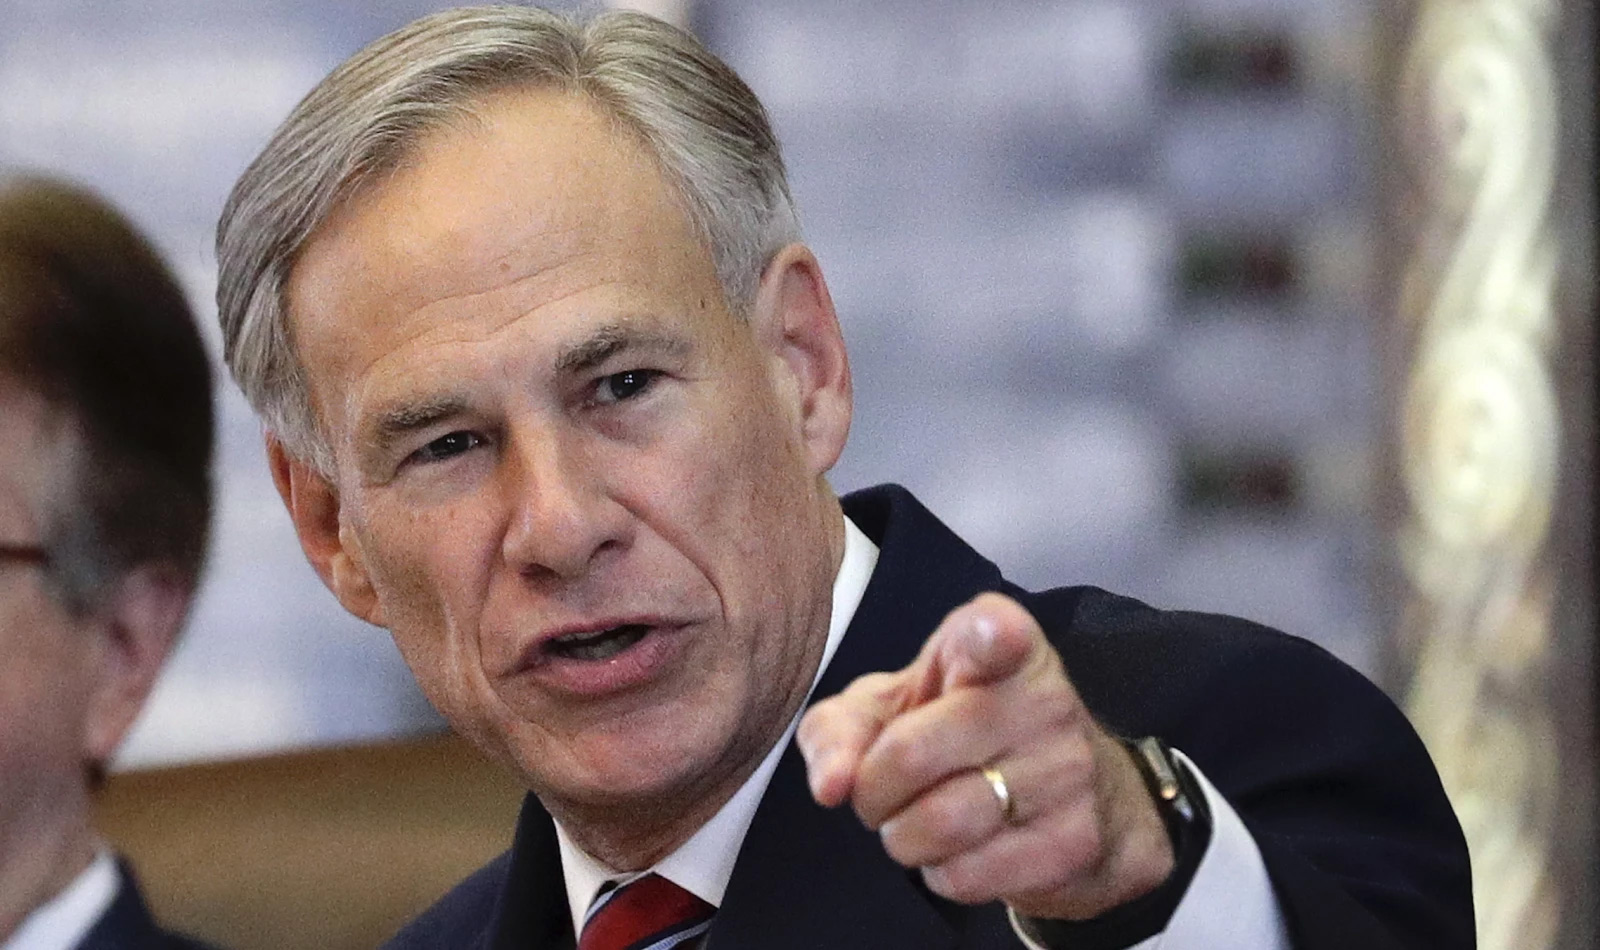 Gov. Abbott holds ceremonial signing for ‘Save Women’s Sports Act’ in Denton